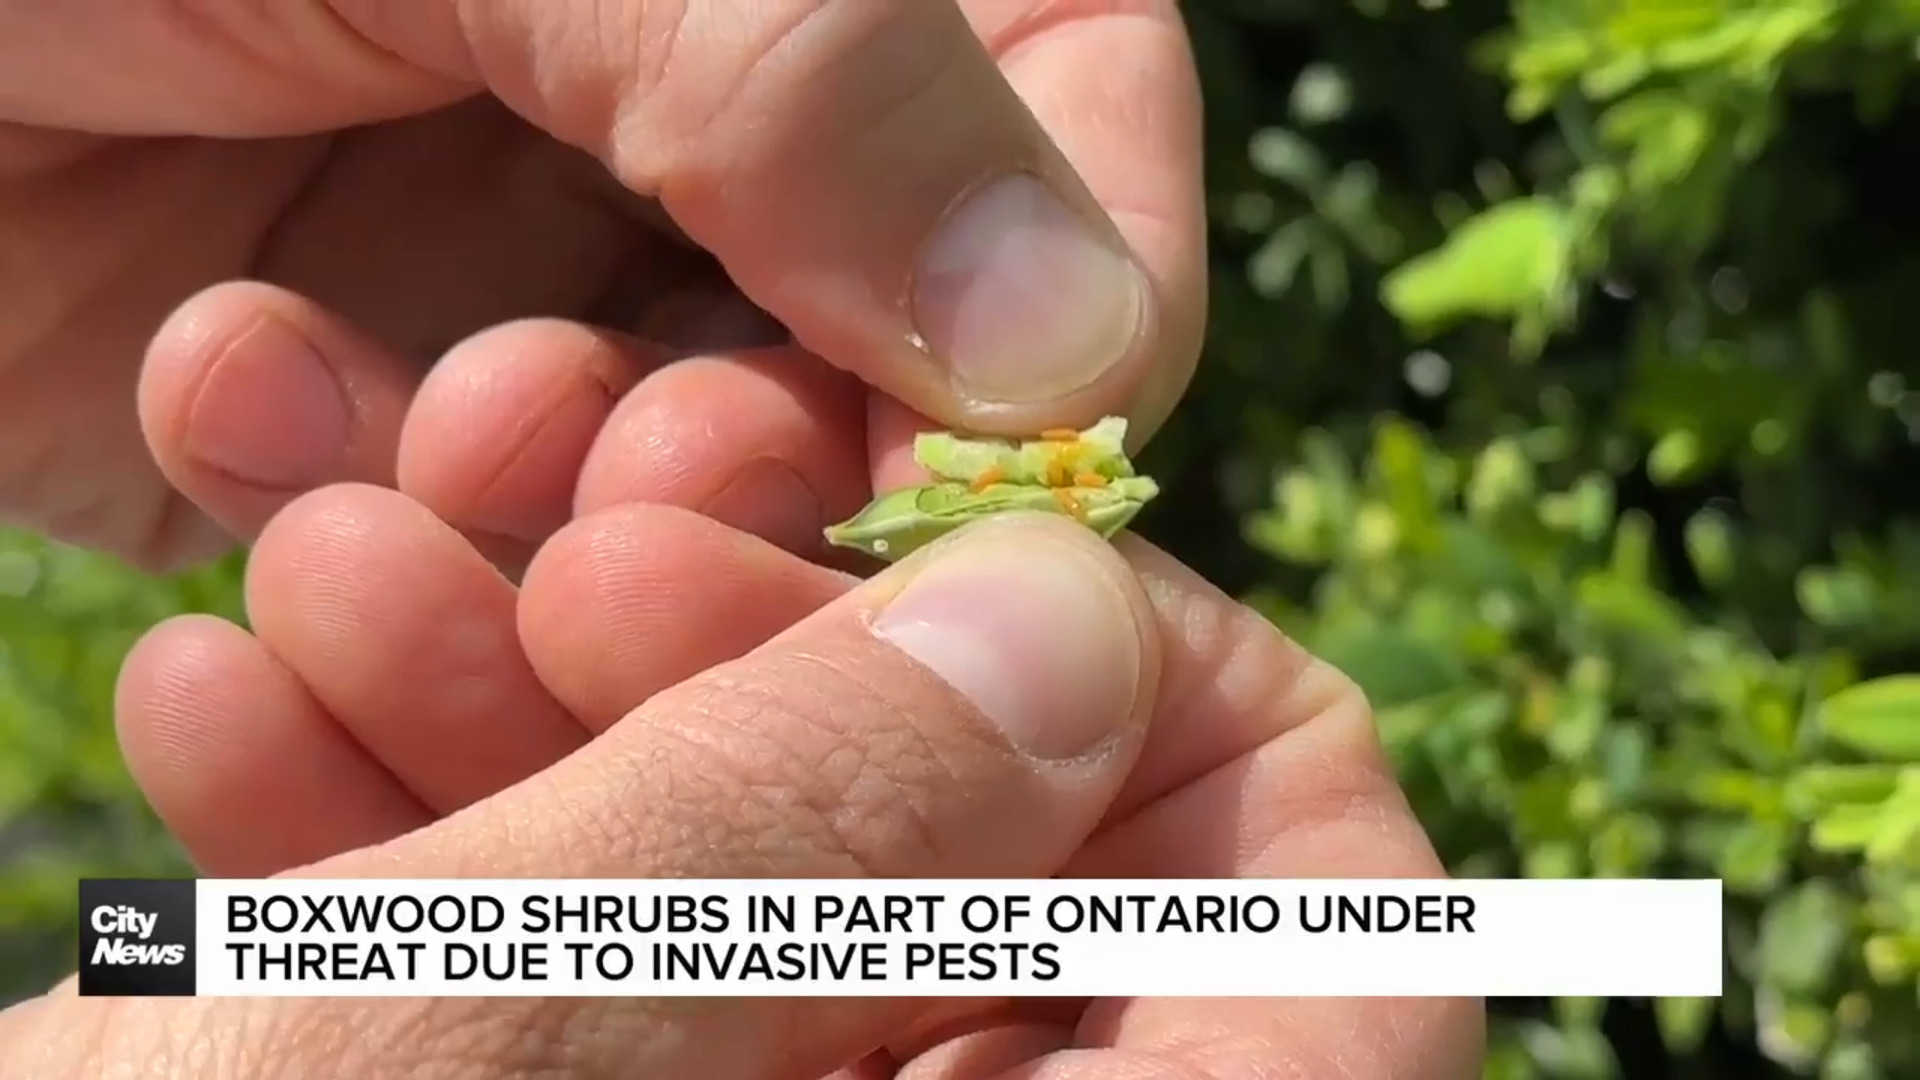 Boxwood shrubs in part of Ontario under threat due to invasive pests